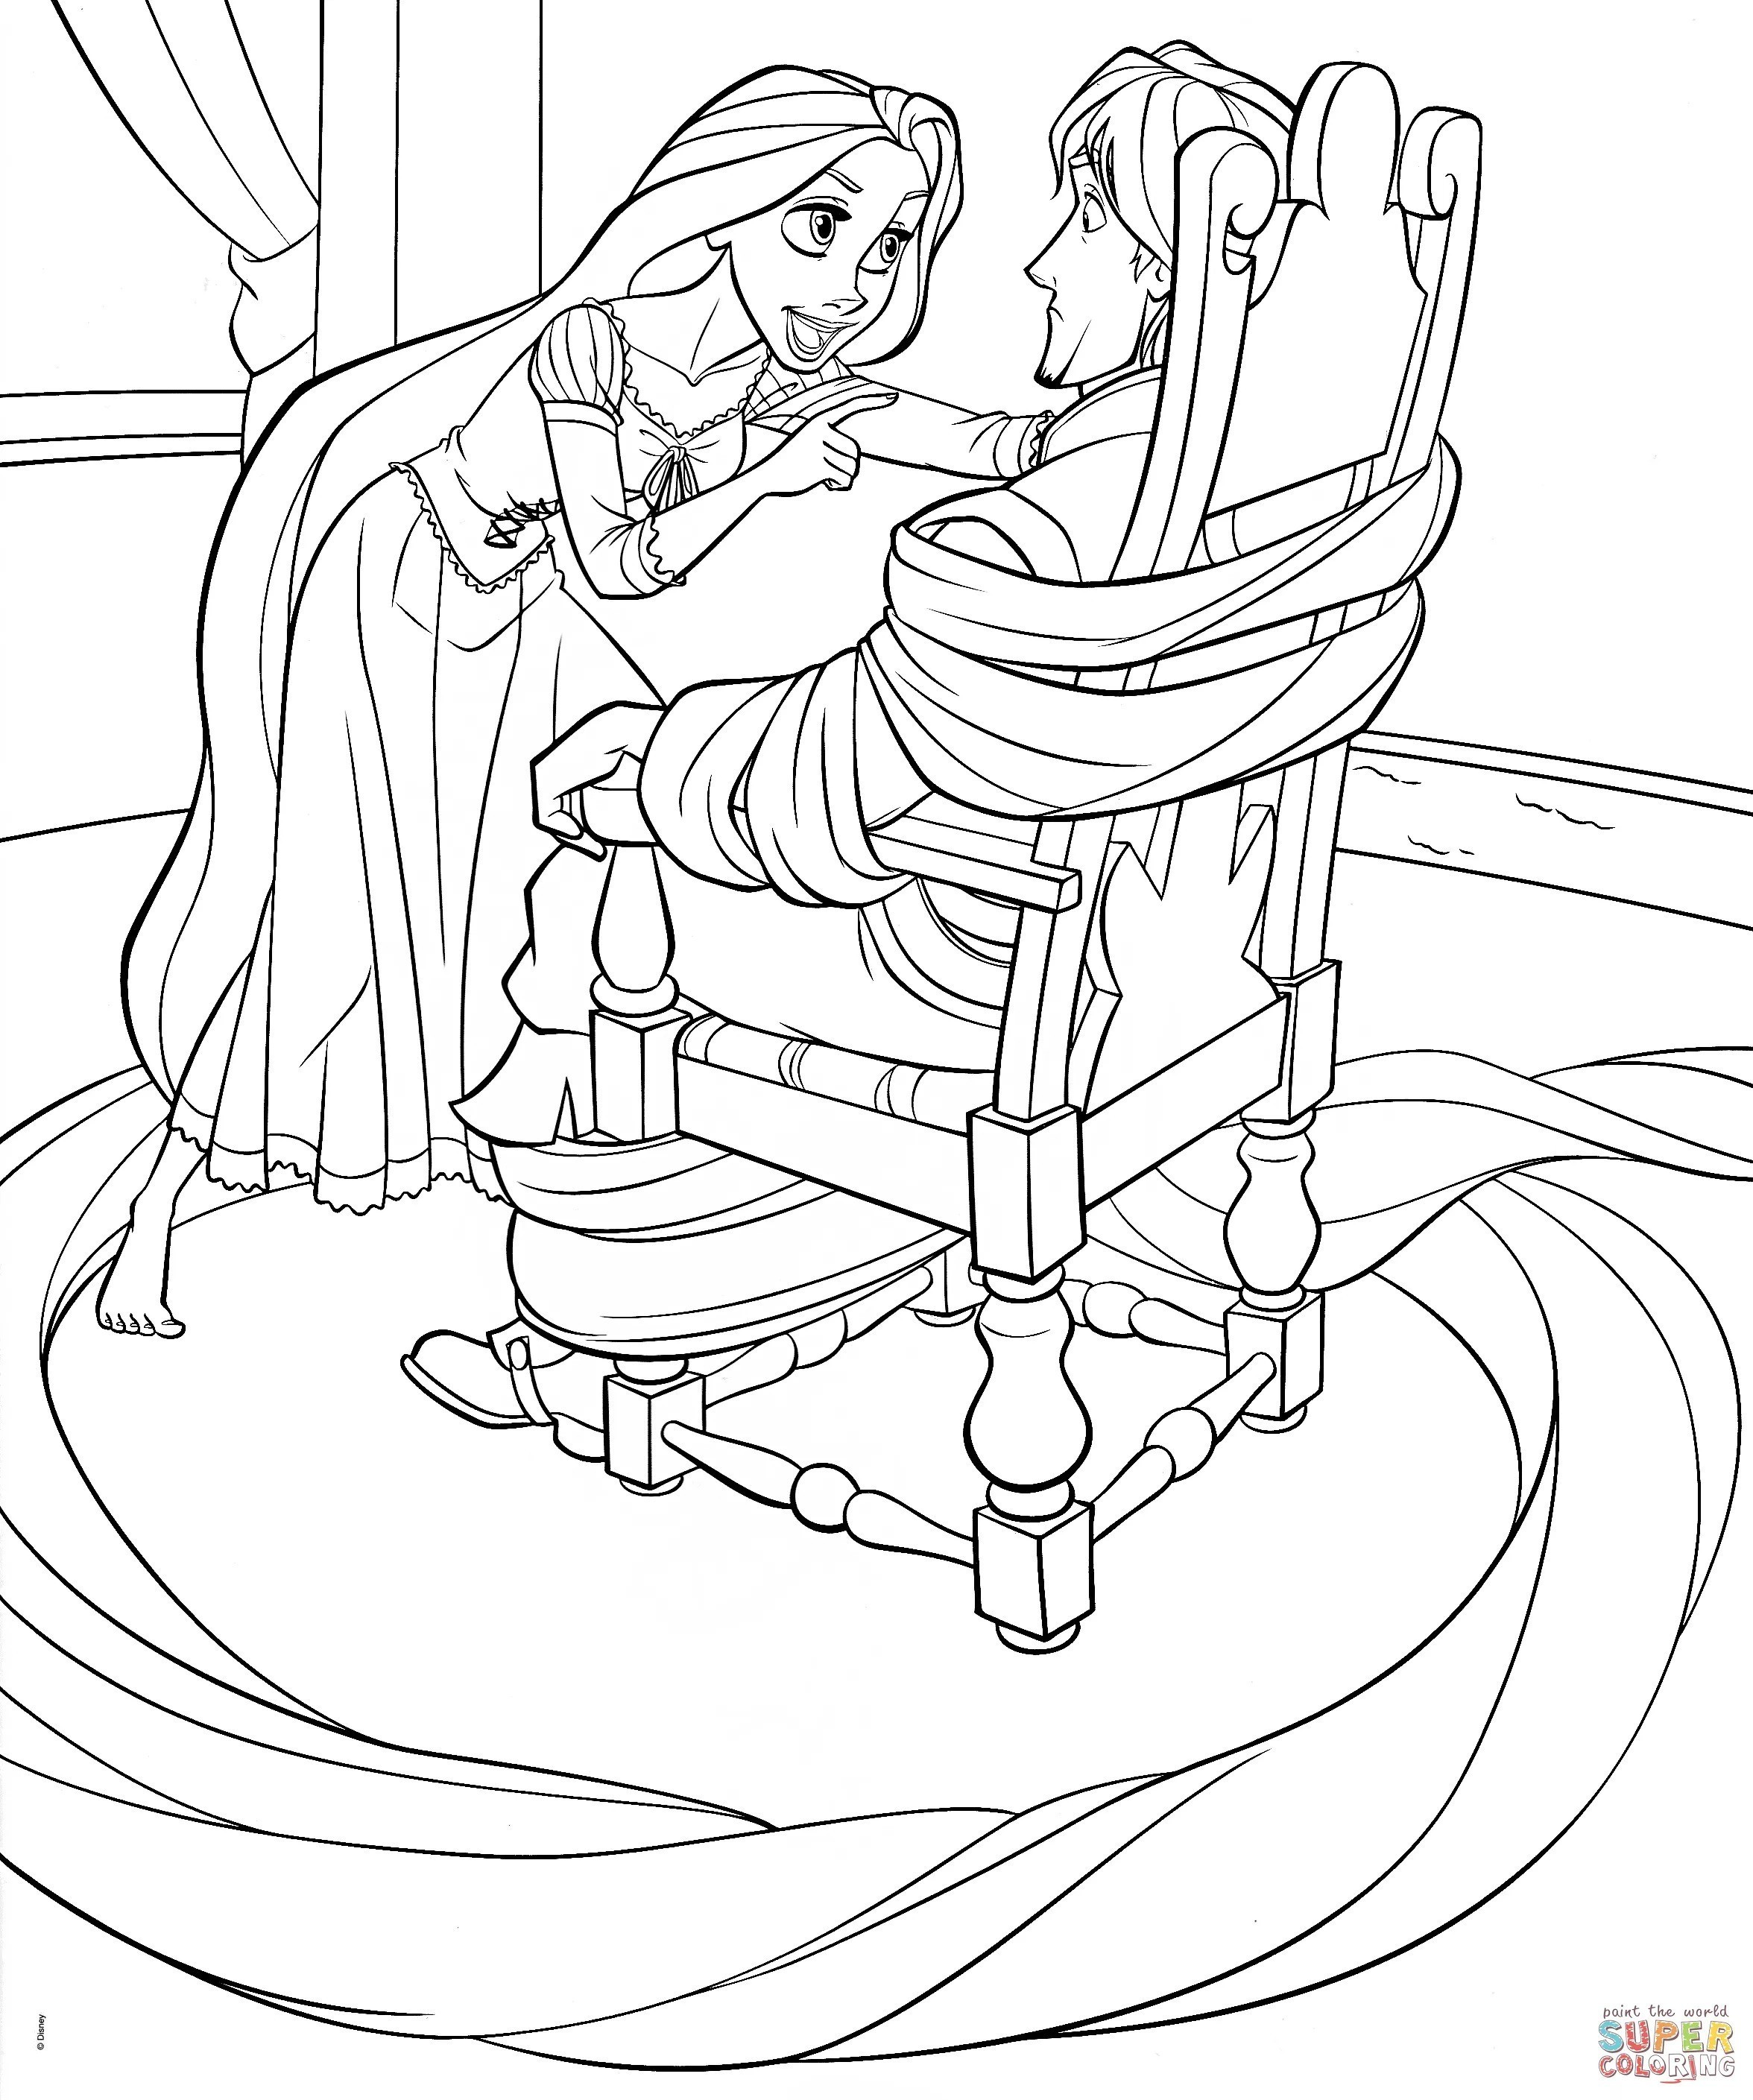 Disney Princess Coloring Pages Rapunzel and Flynn Wallpaper